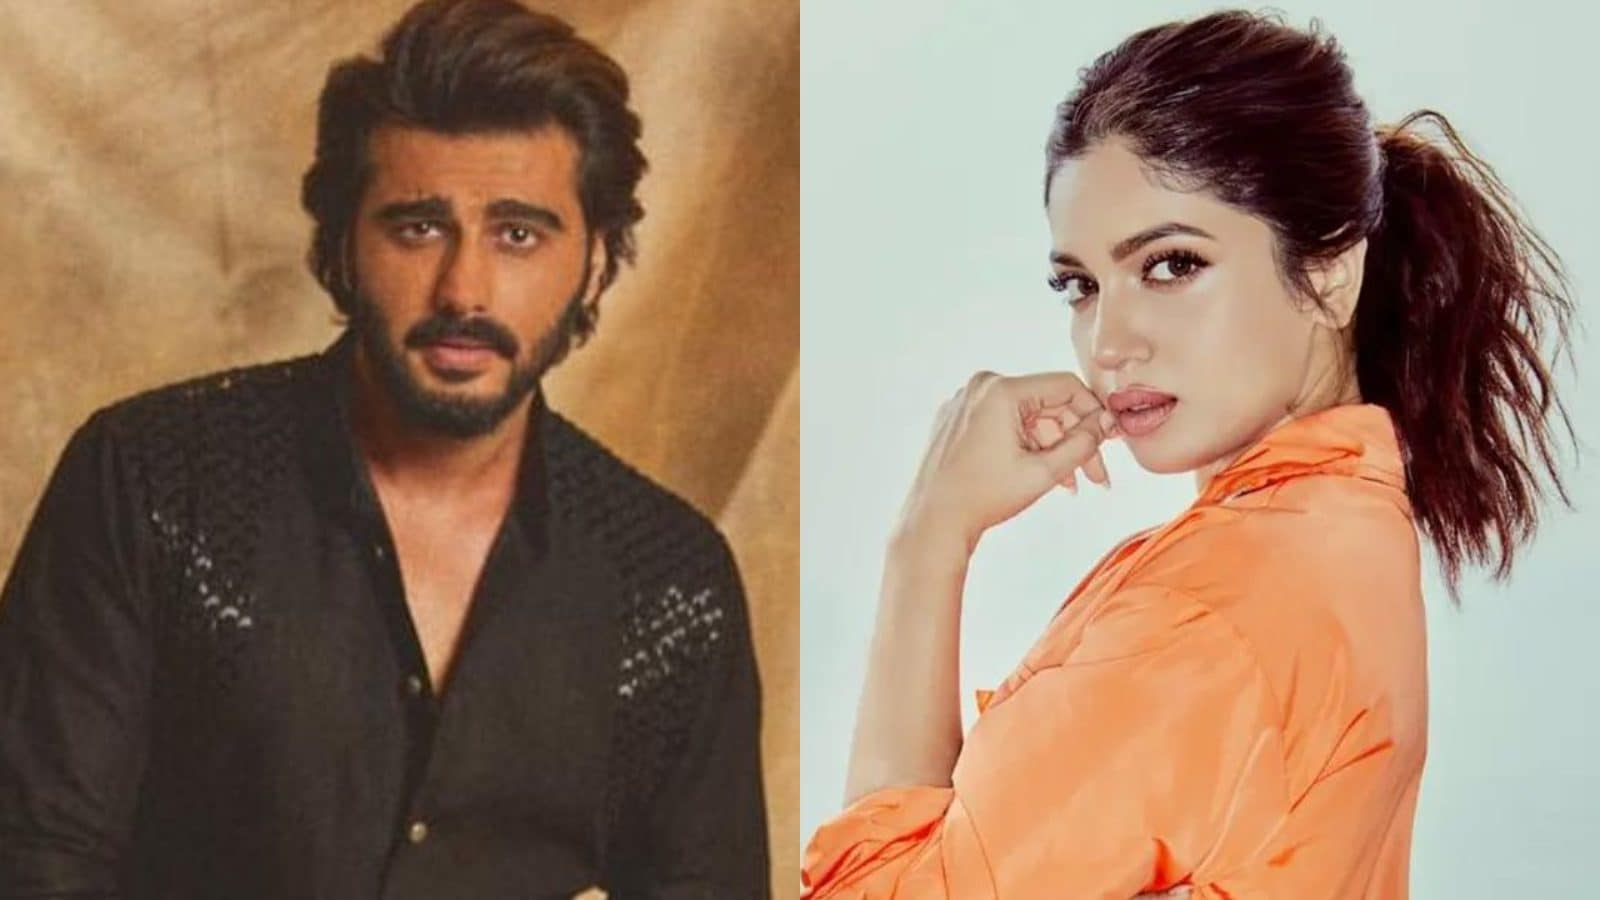 Bhumi Pednekar To Star In The Lady Killer, Arjun Kapoor Gives Her Warm Welcome - News18